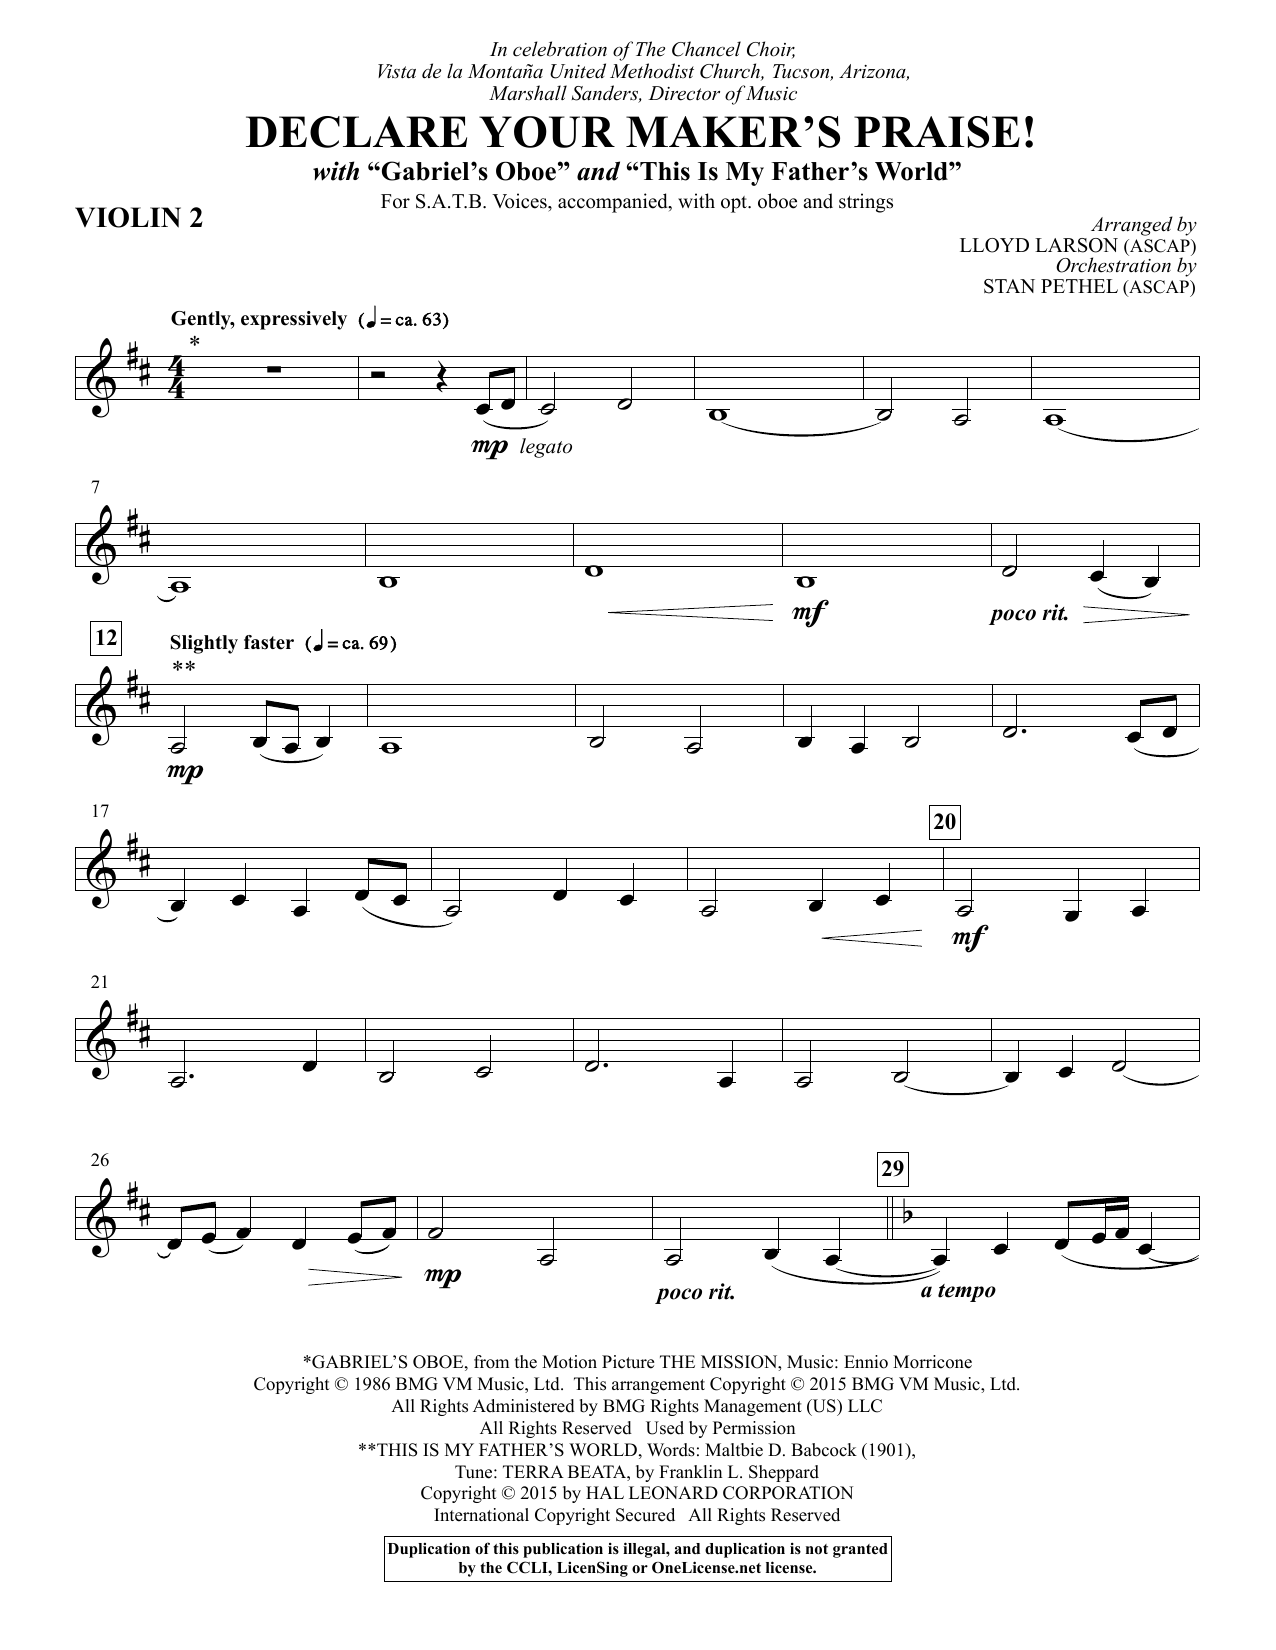 Lloyd Larson Declare Your Maker's Praise! - Violin 2 sheet music notes and chords. Download Printable PDF.